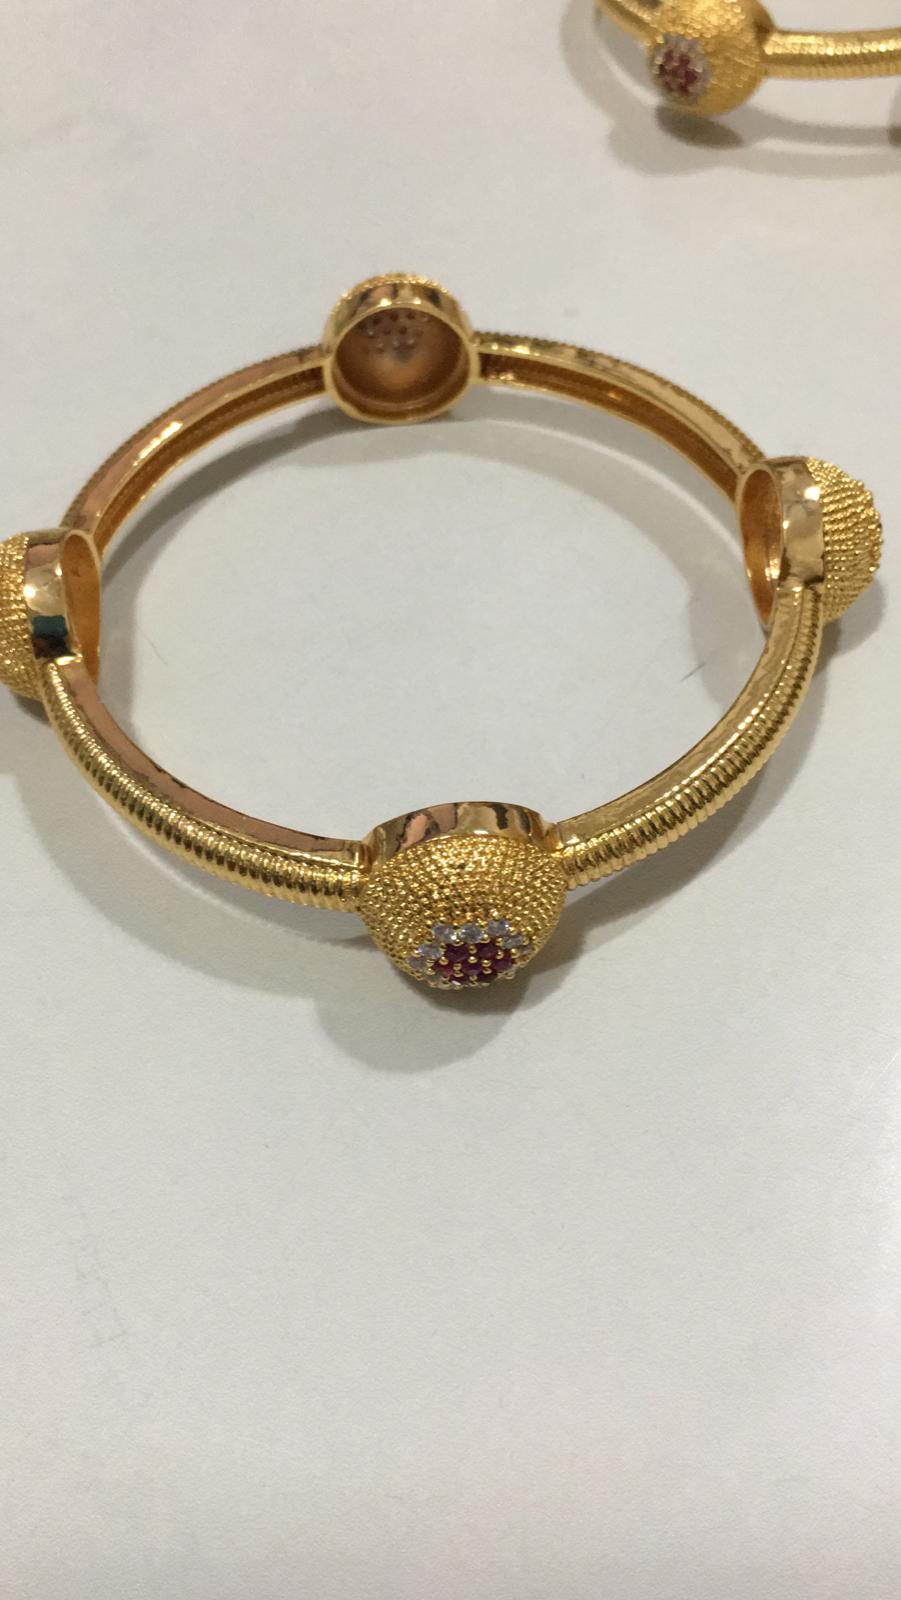 157675C $20.00 1PC BANGLE (GOLD PLATED)